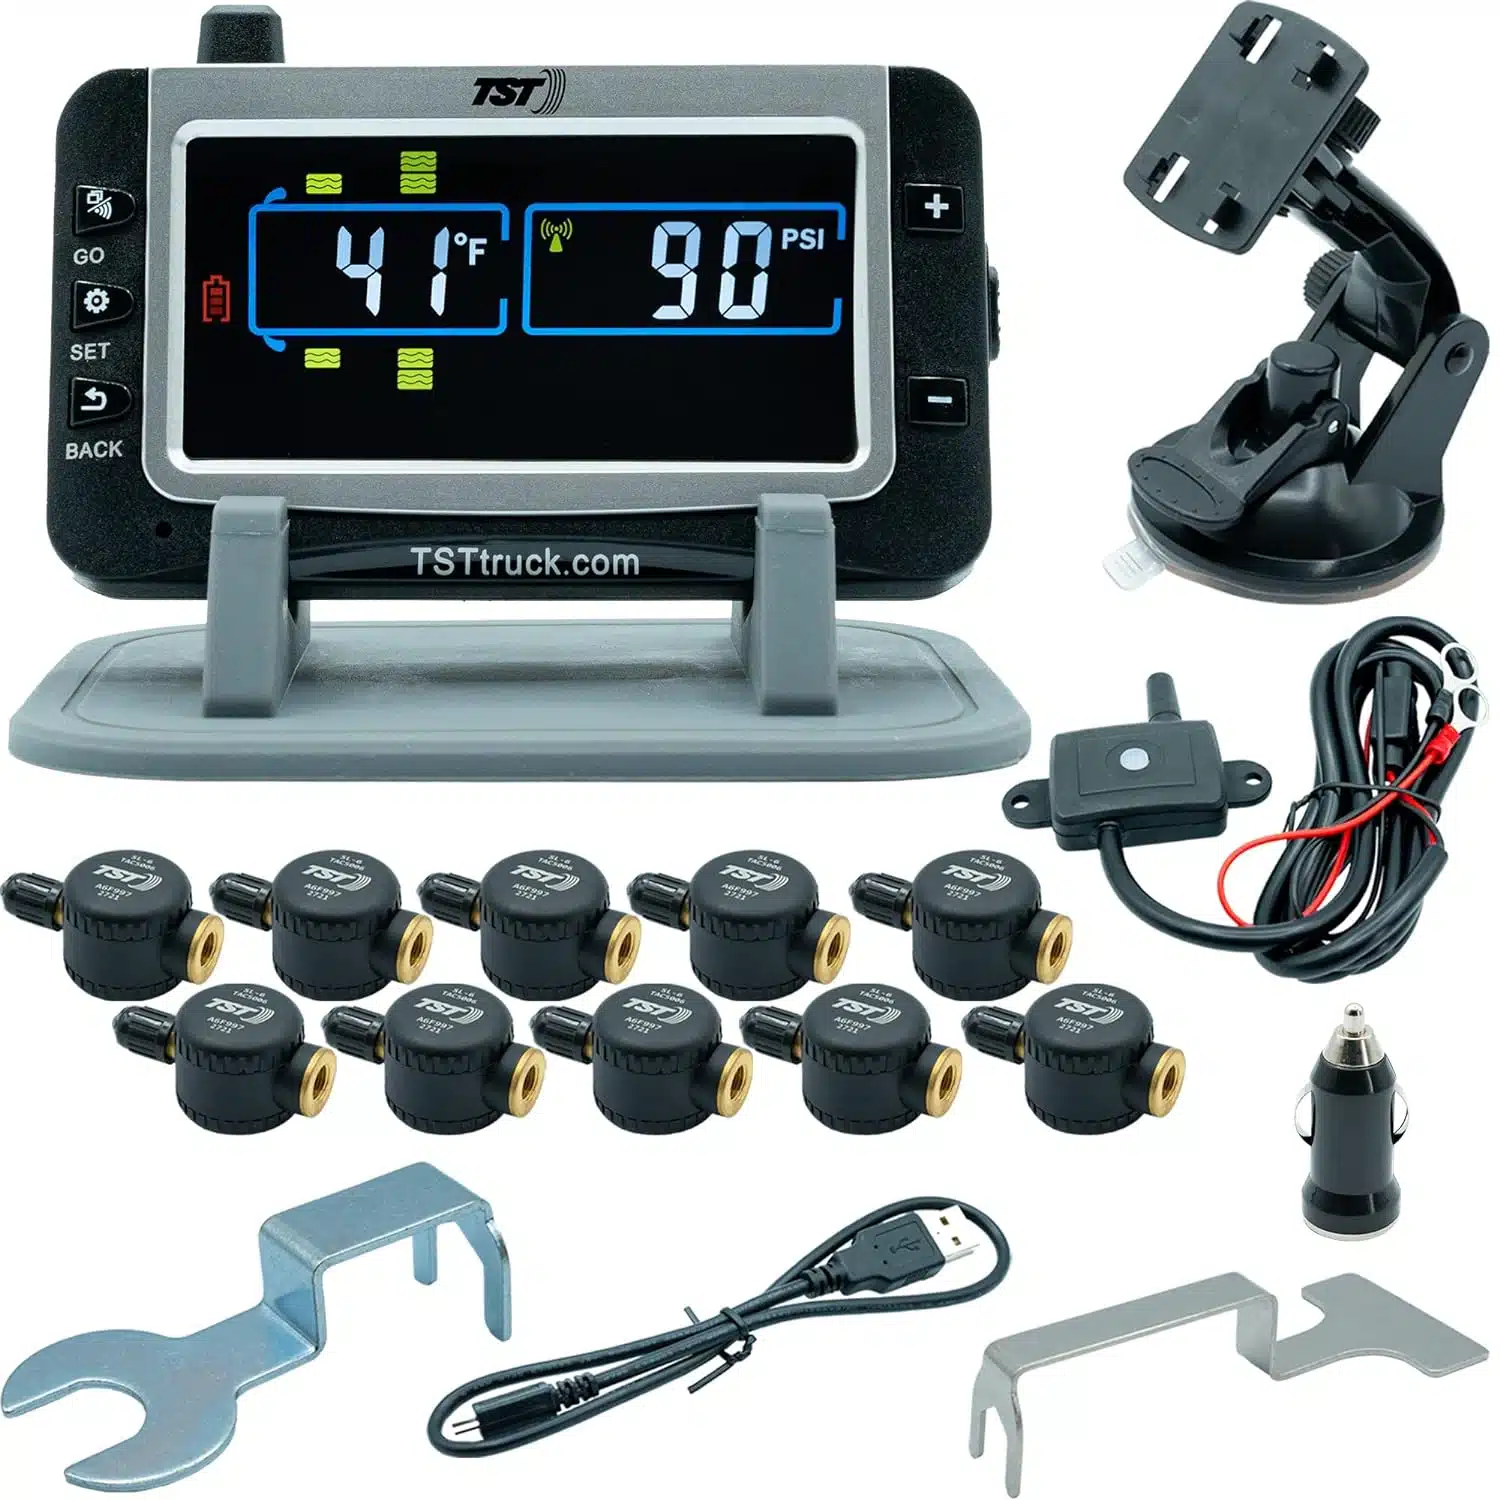 Tire Monitor System